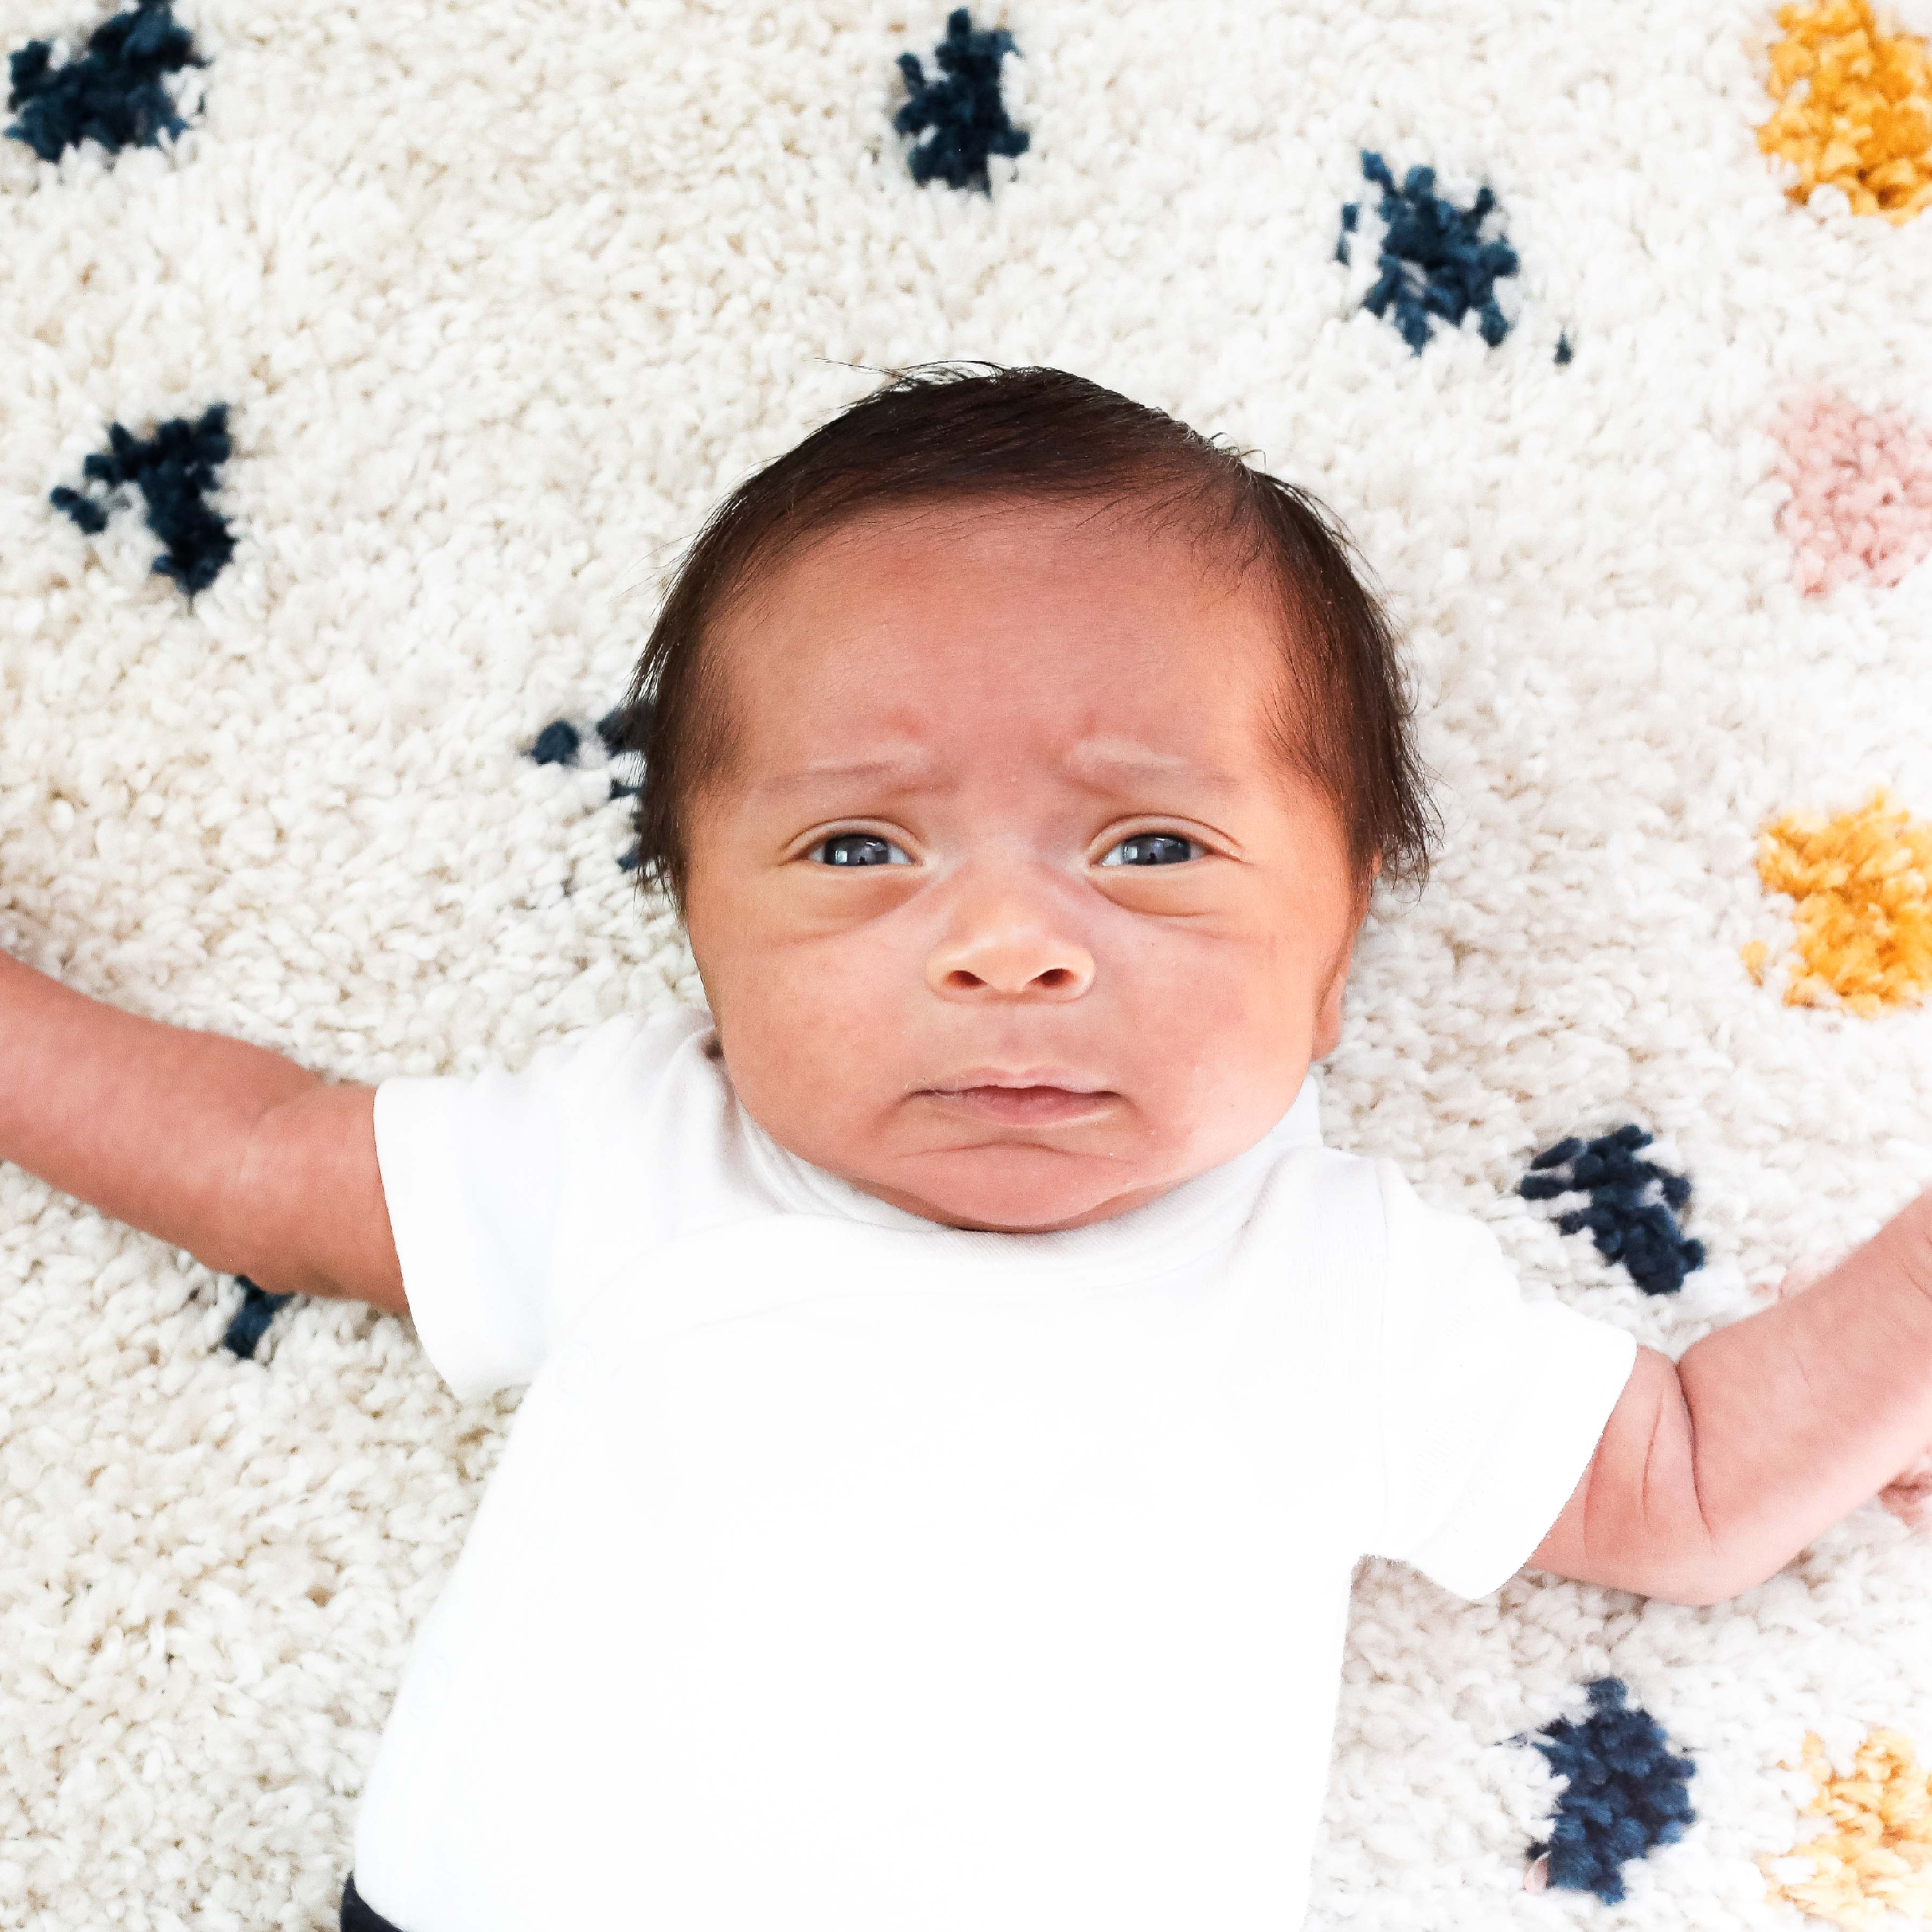 Newborn baby boy with dark hair and white onesie lays on white rug with blue and yellow polka dots.